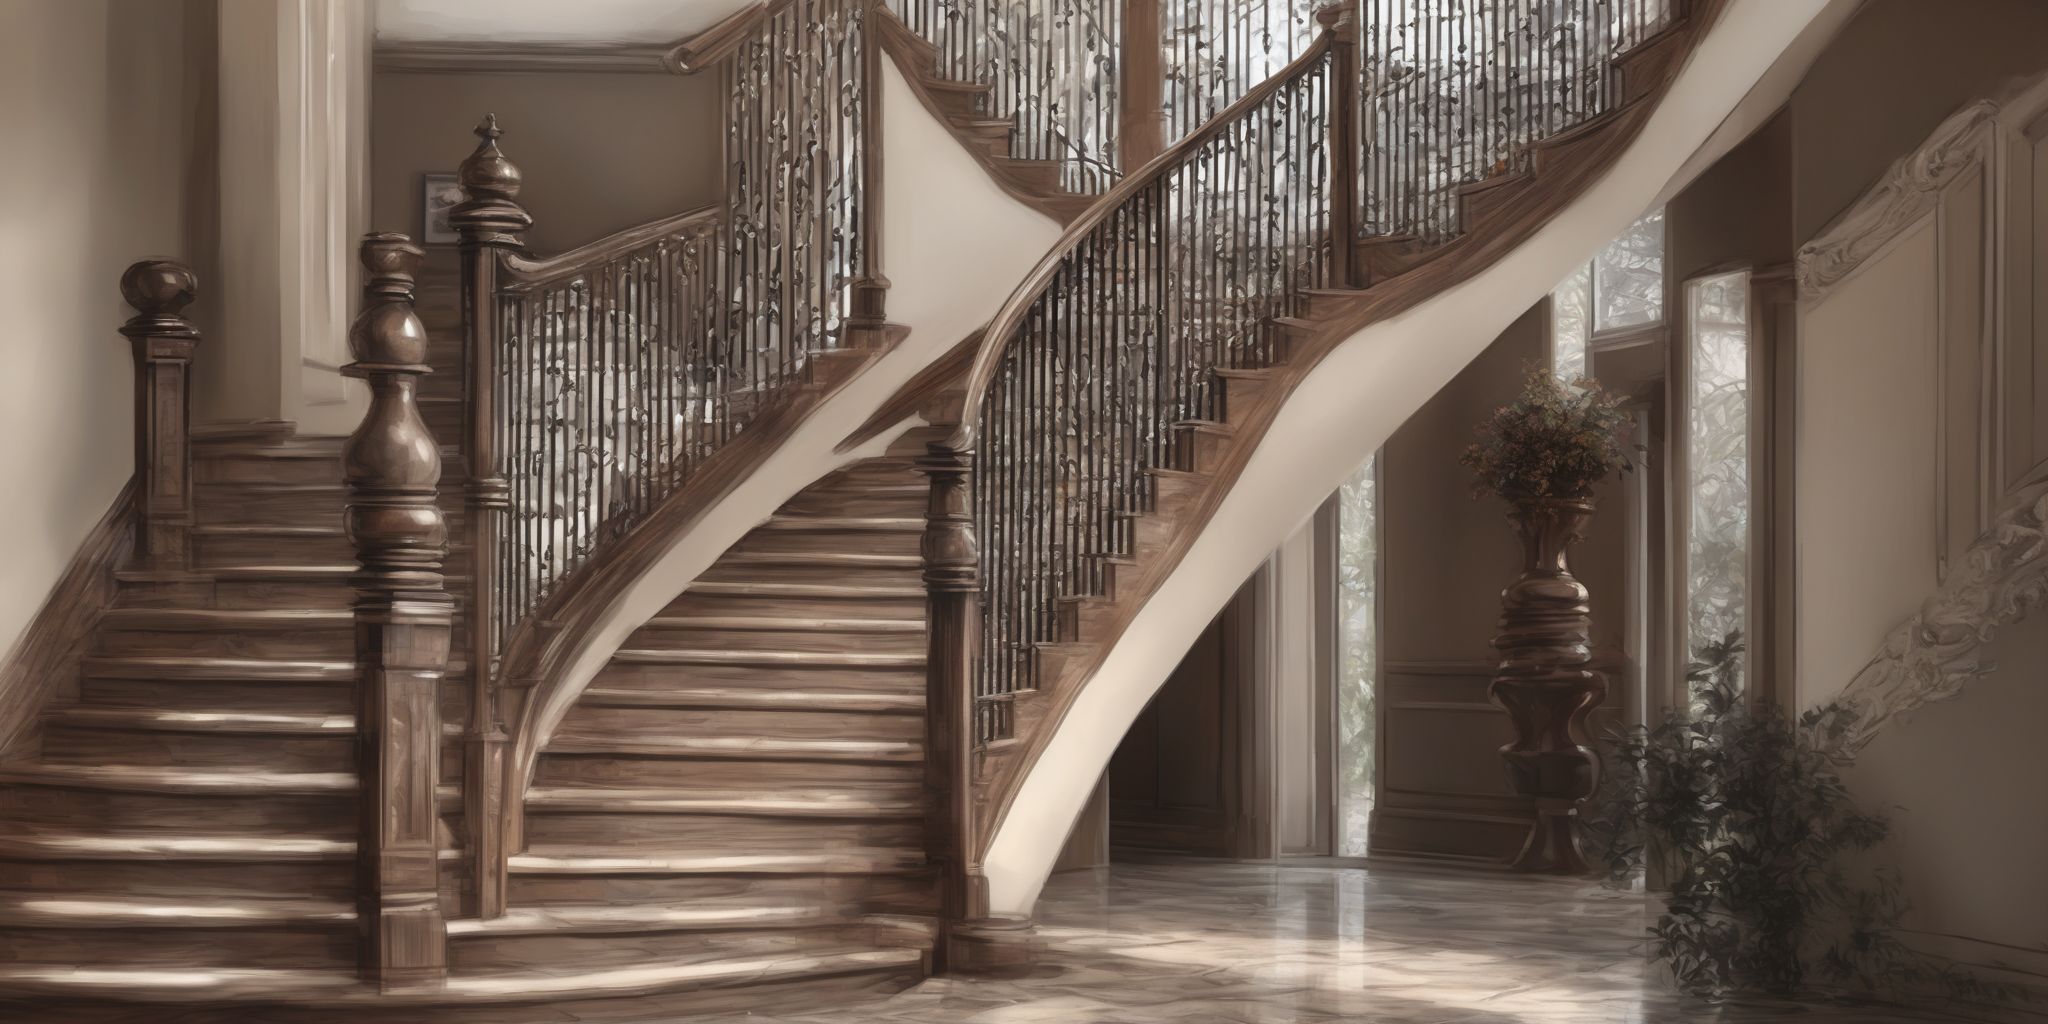 Staircase  in realistic, photographic style